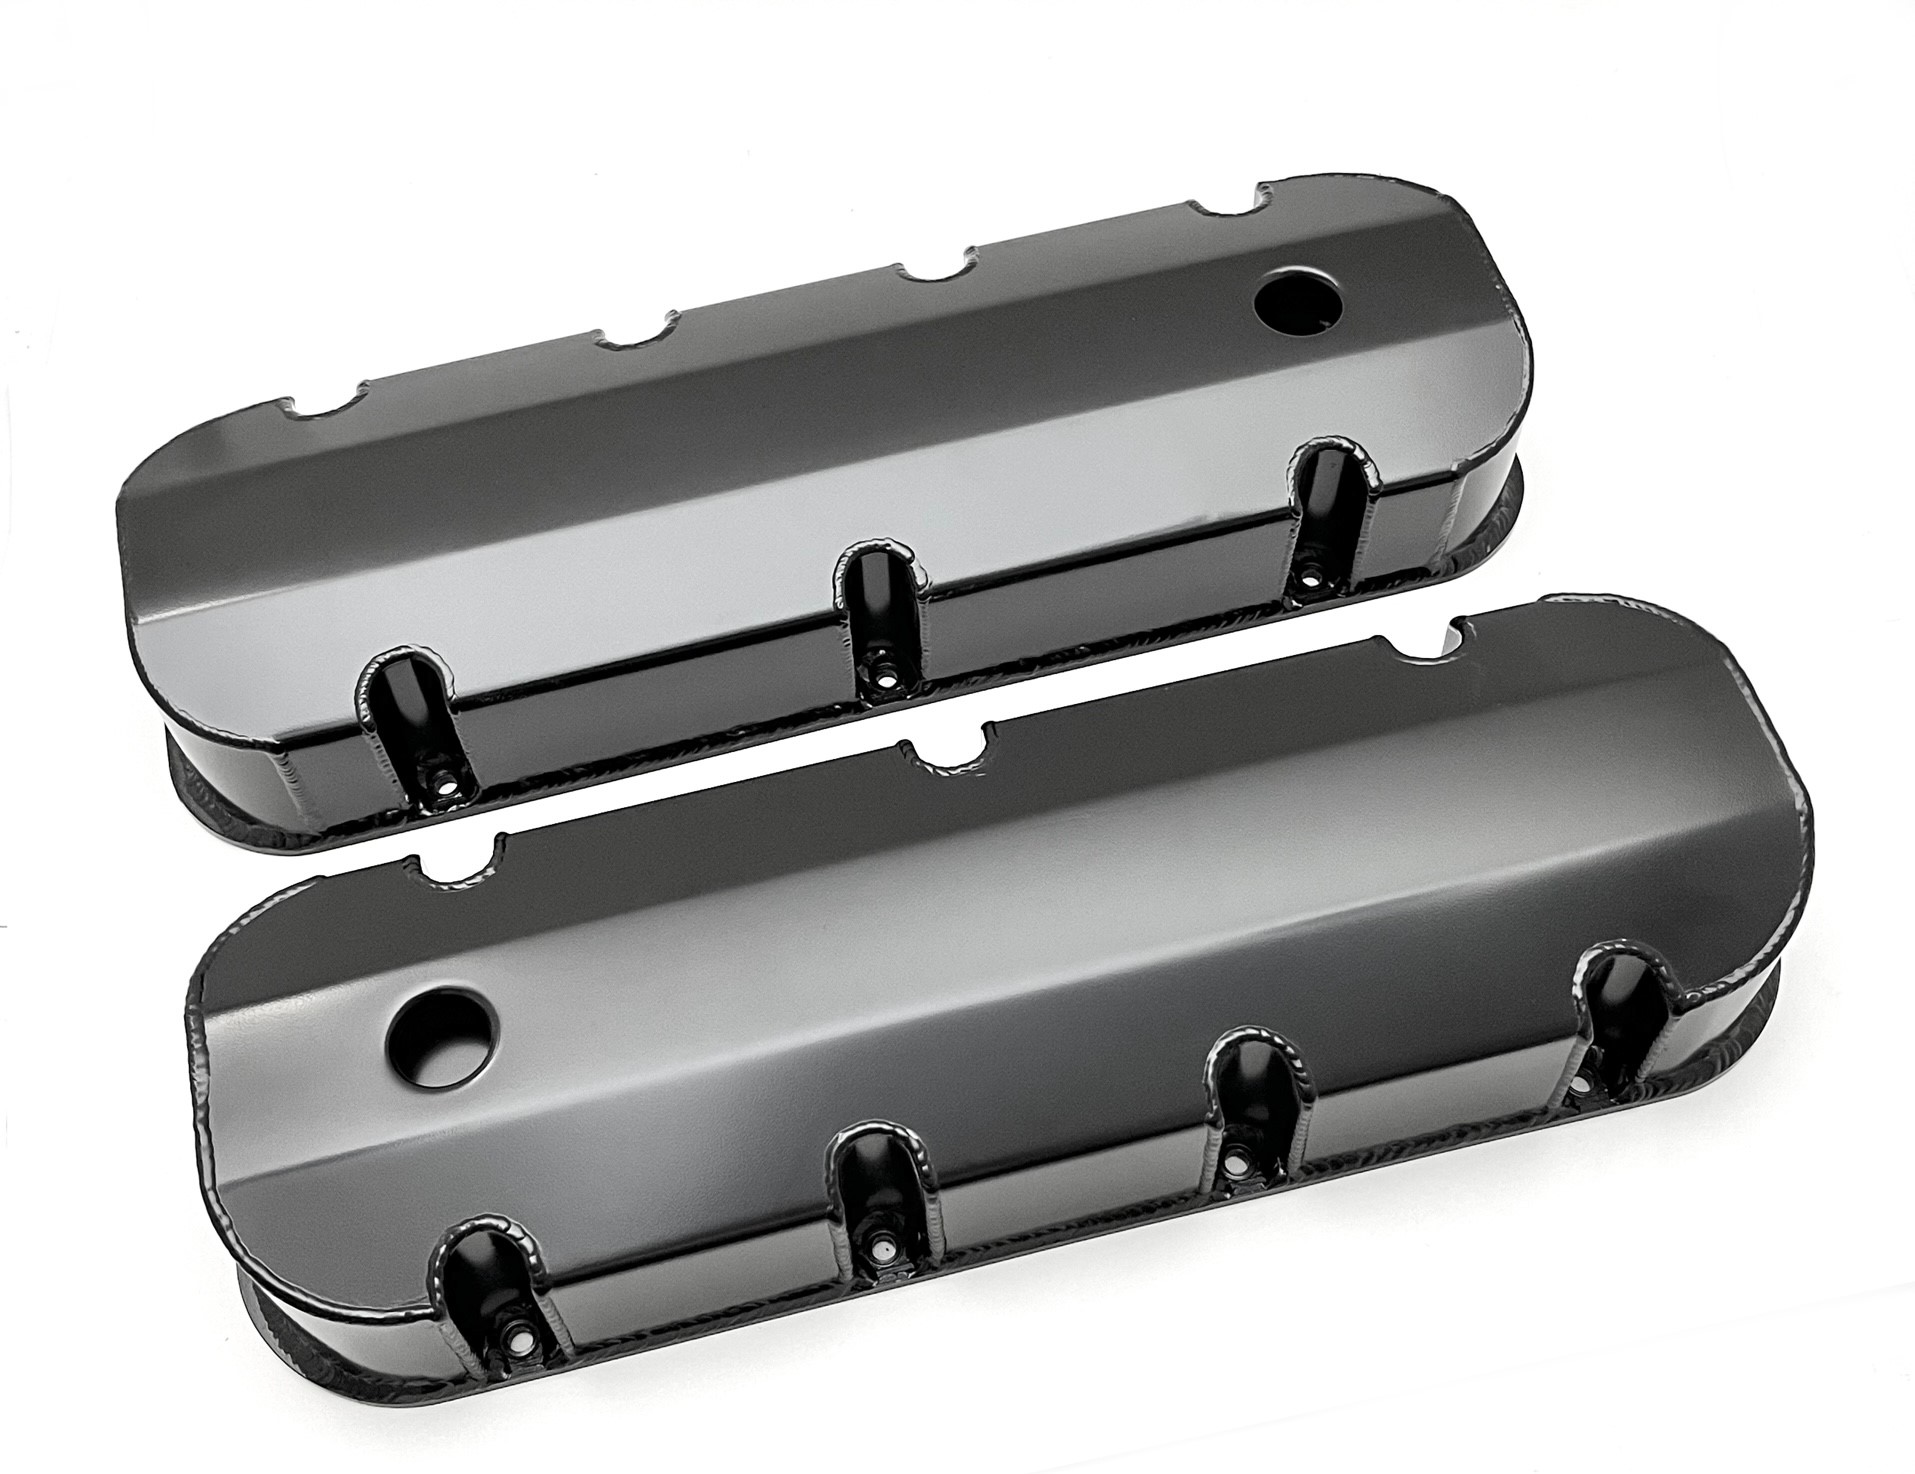 Racing Power Company R6248 Tall Fabricated Anodized Aluminum Valve Cover for Big Block Chevy 